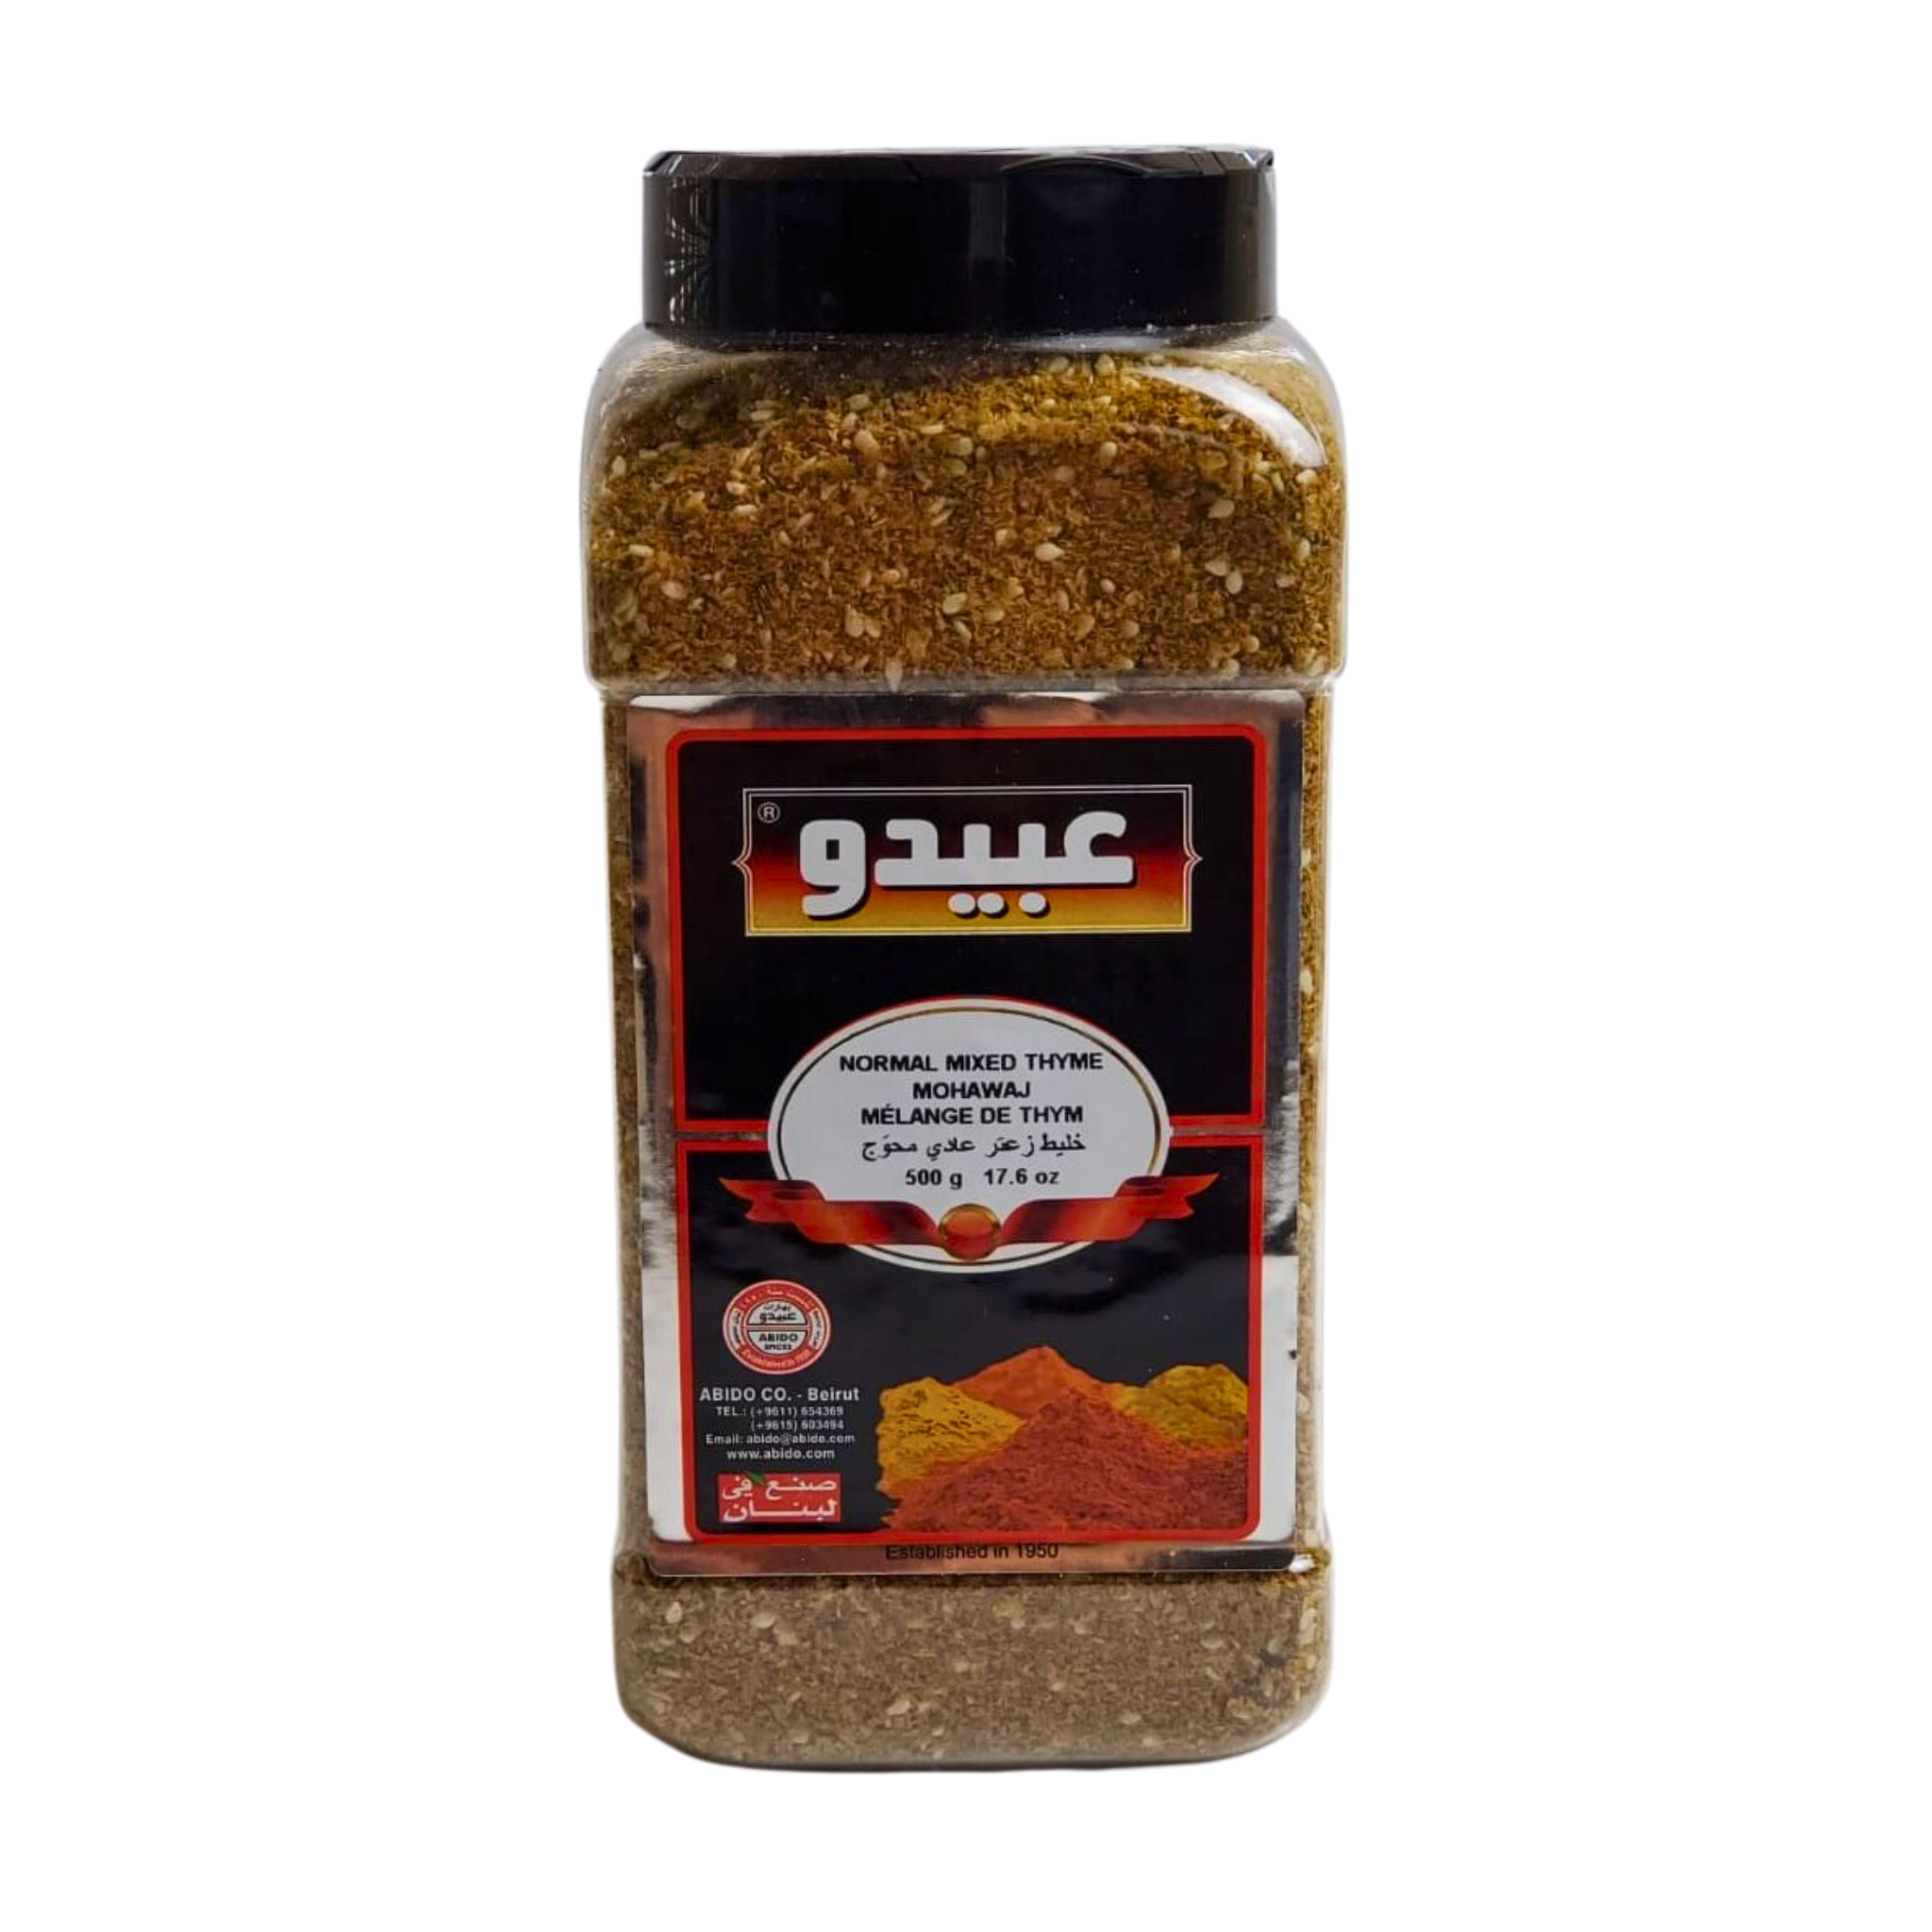 ABIDO Spices Normal Mixed Thyme 500 g